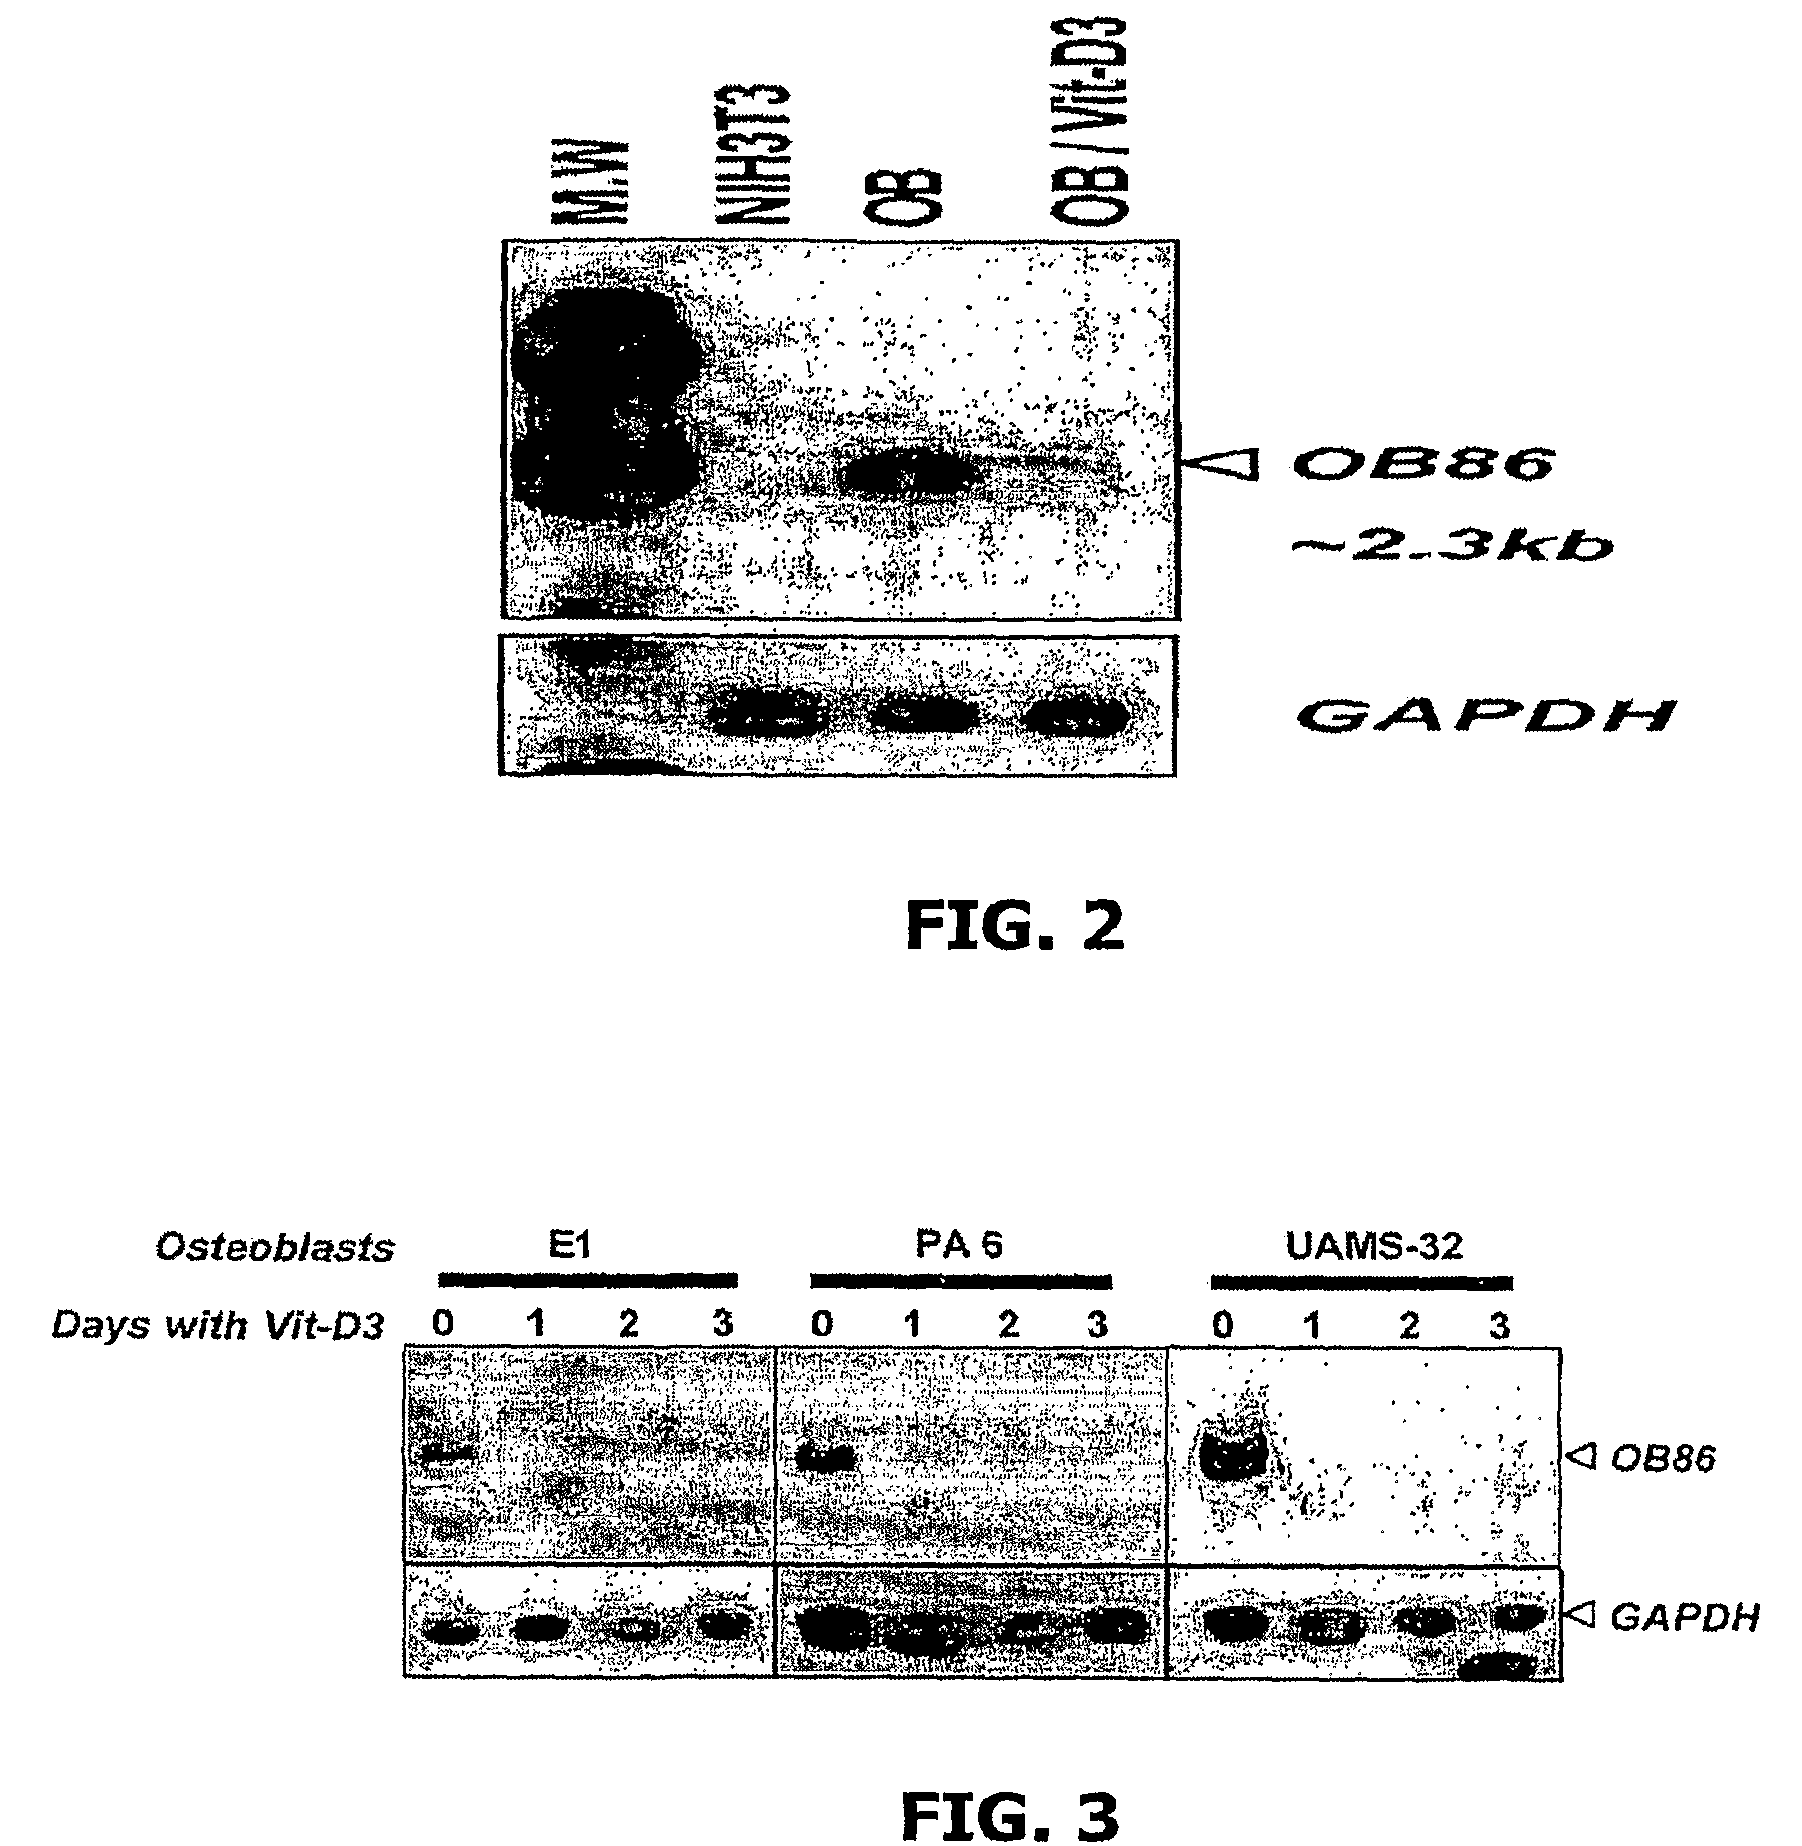 Methods for regulating osteoclast differentiation and bone resorption using LRRc17